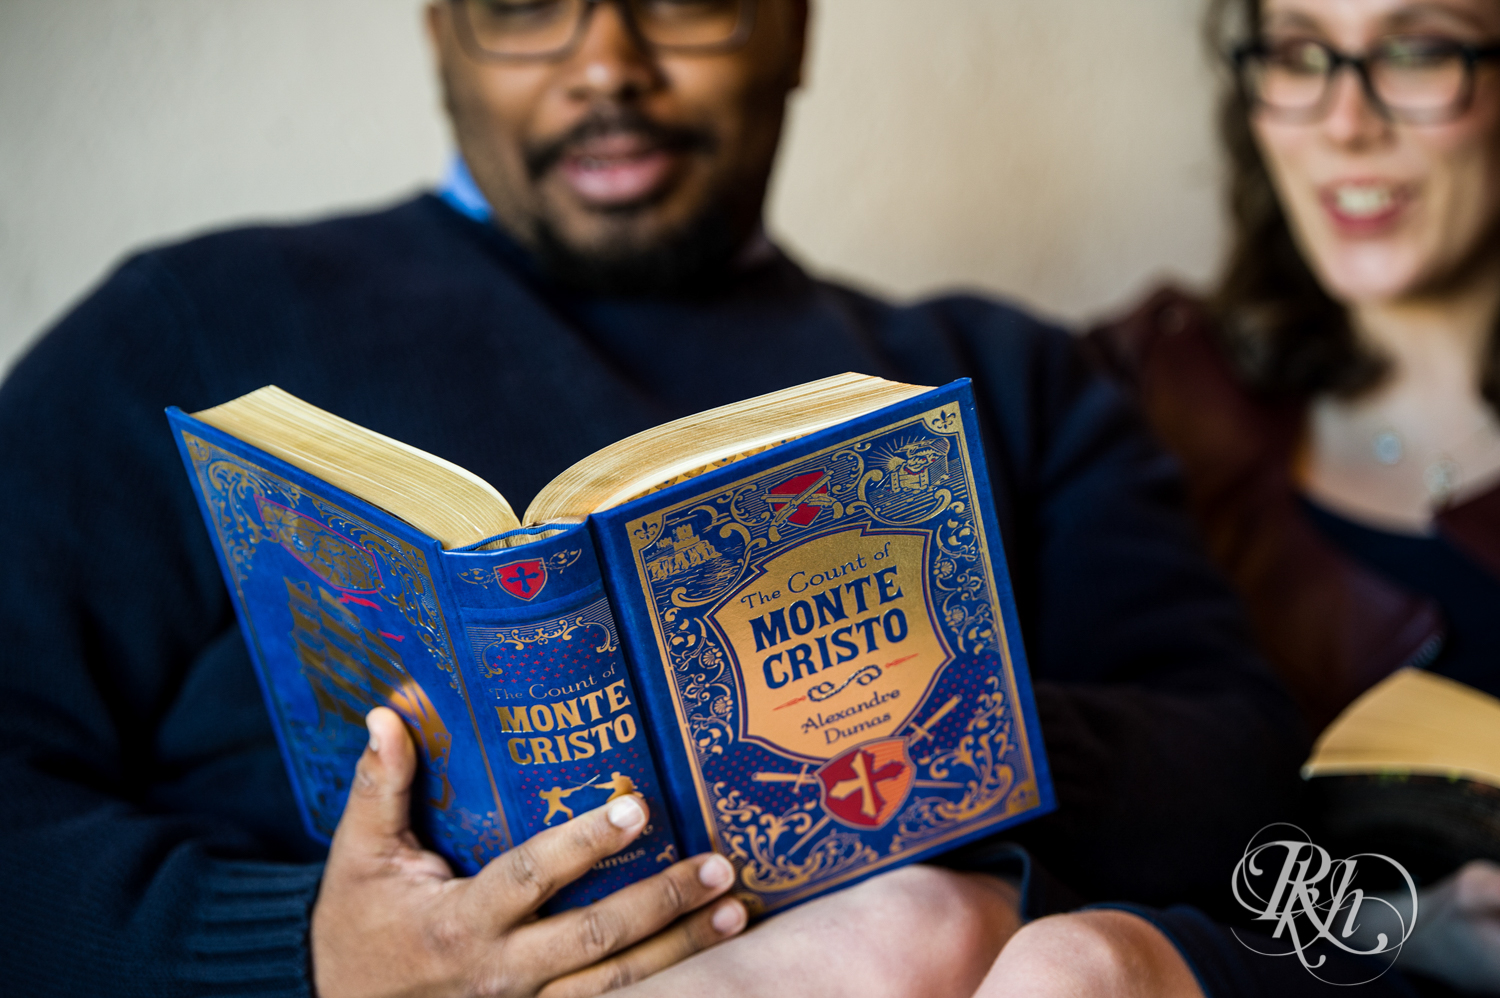 Black man and white woman read books during geeky engagement photography in Saint Paul, Minnesota.